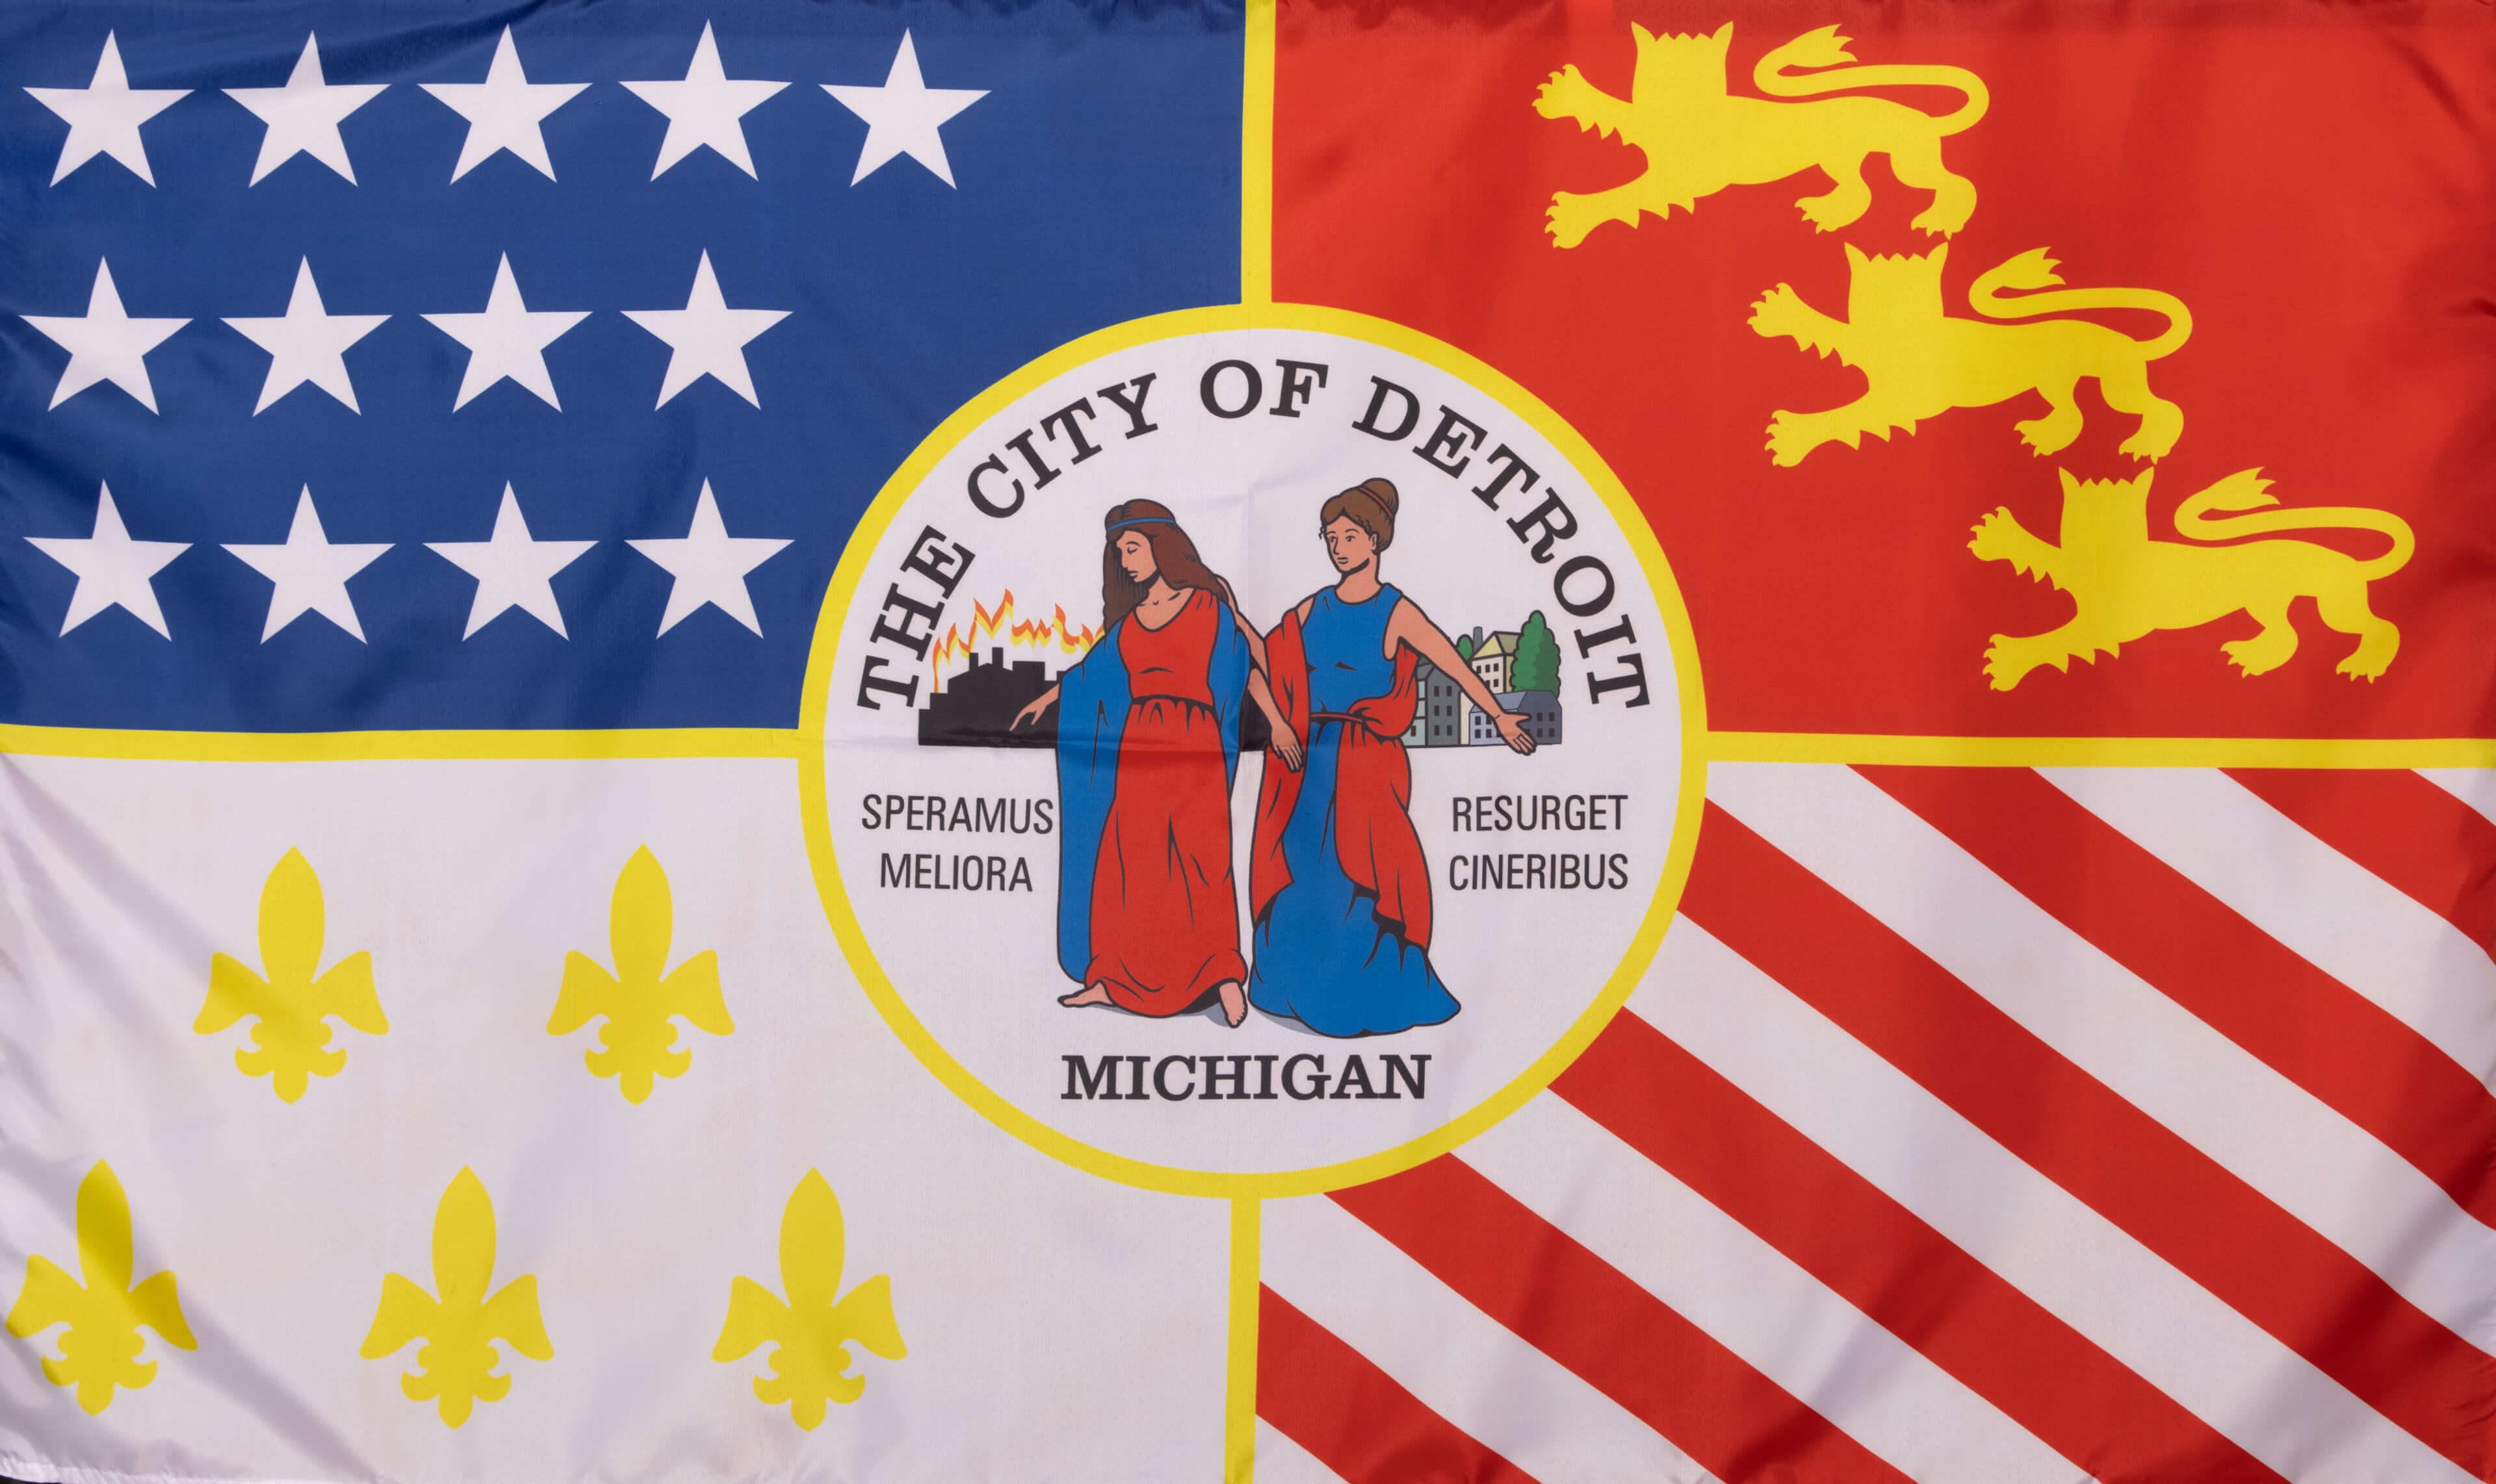 The Flag of the City of Detroit, Michigan-圖片